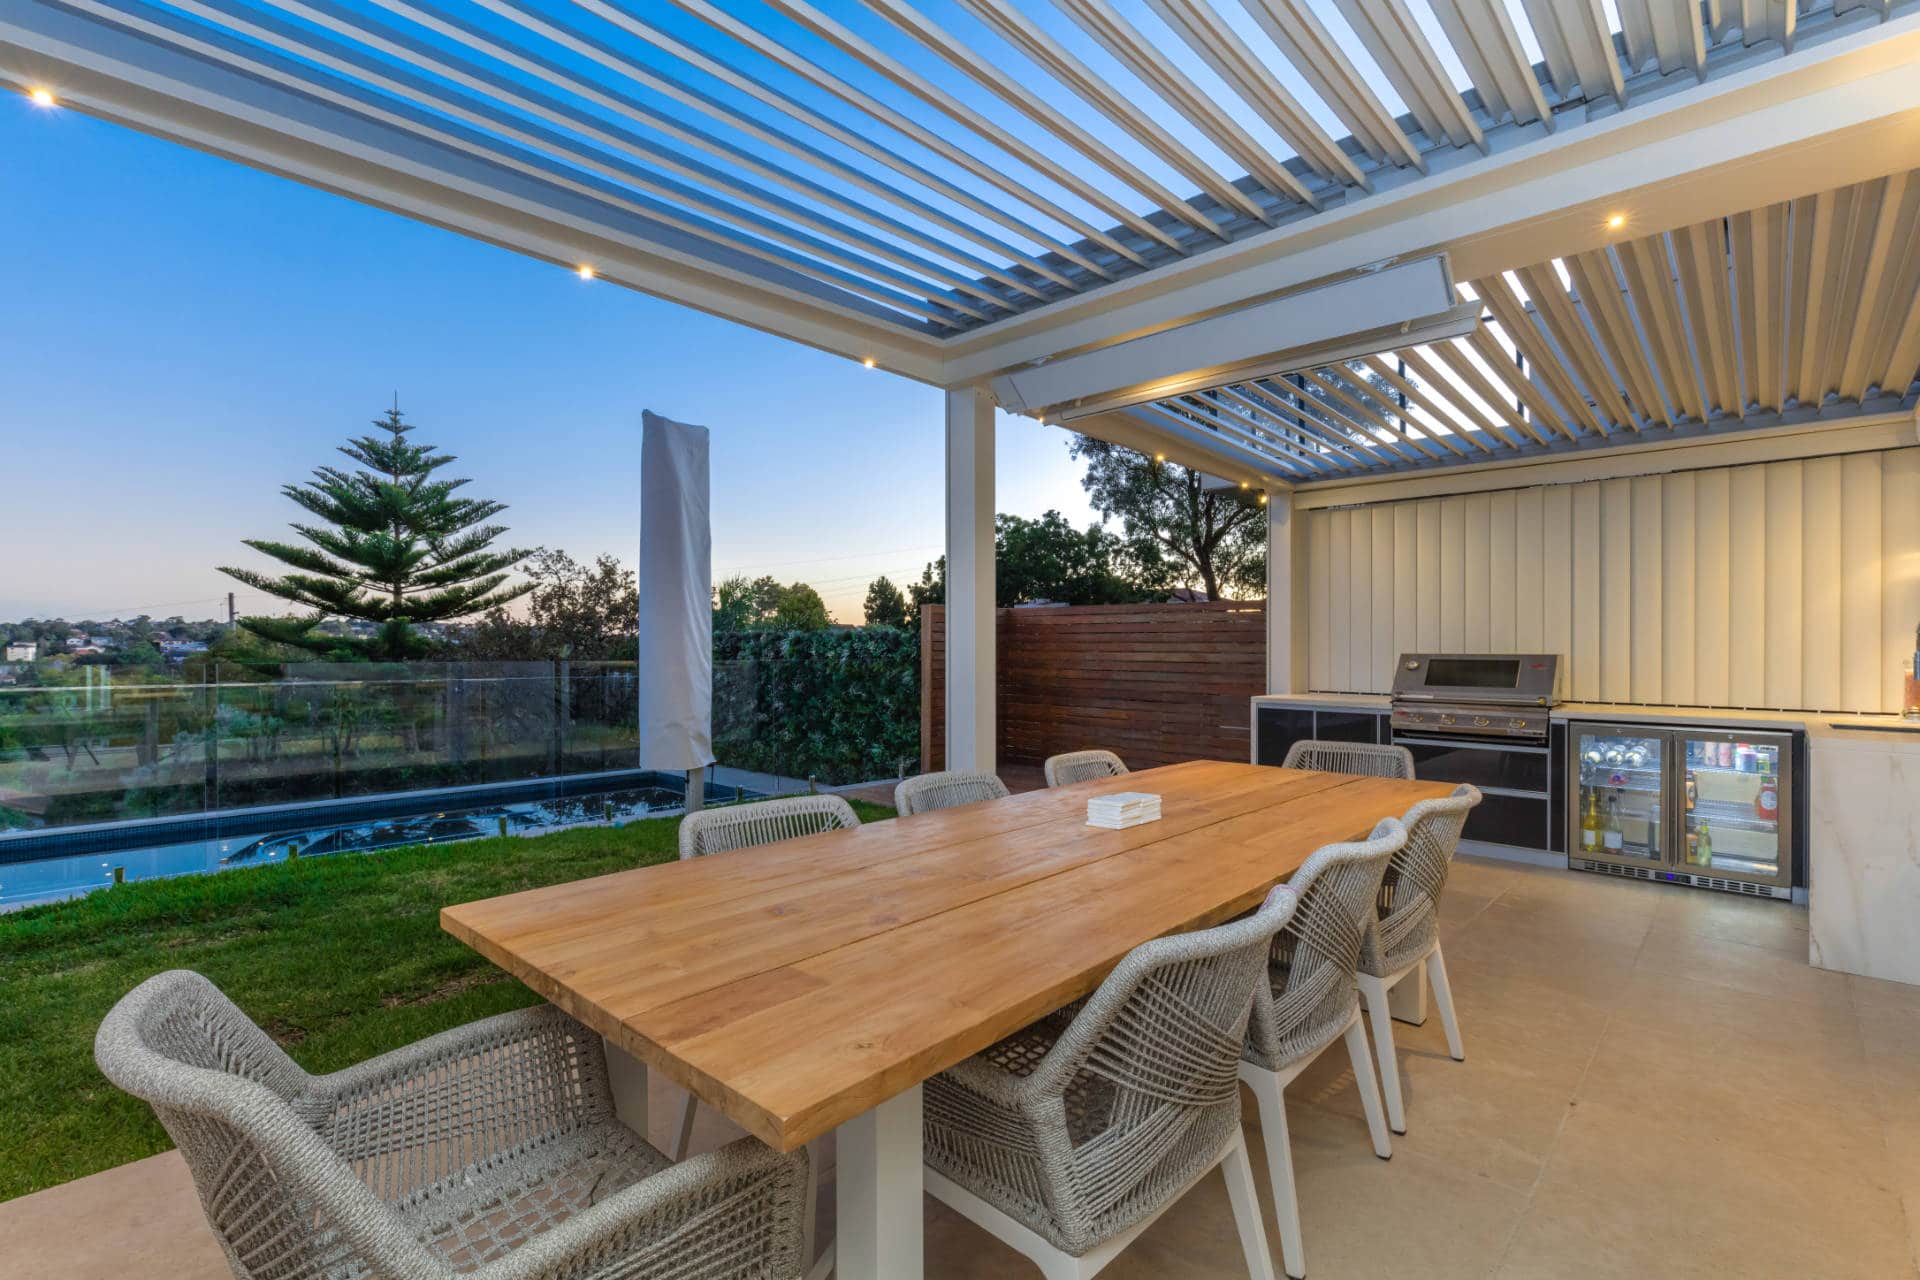 Manly Vale pergola white louvres by dusk.